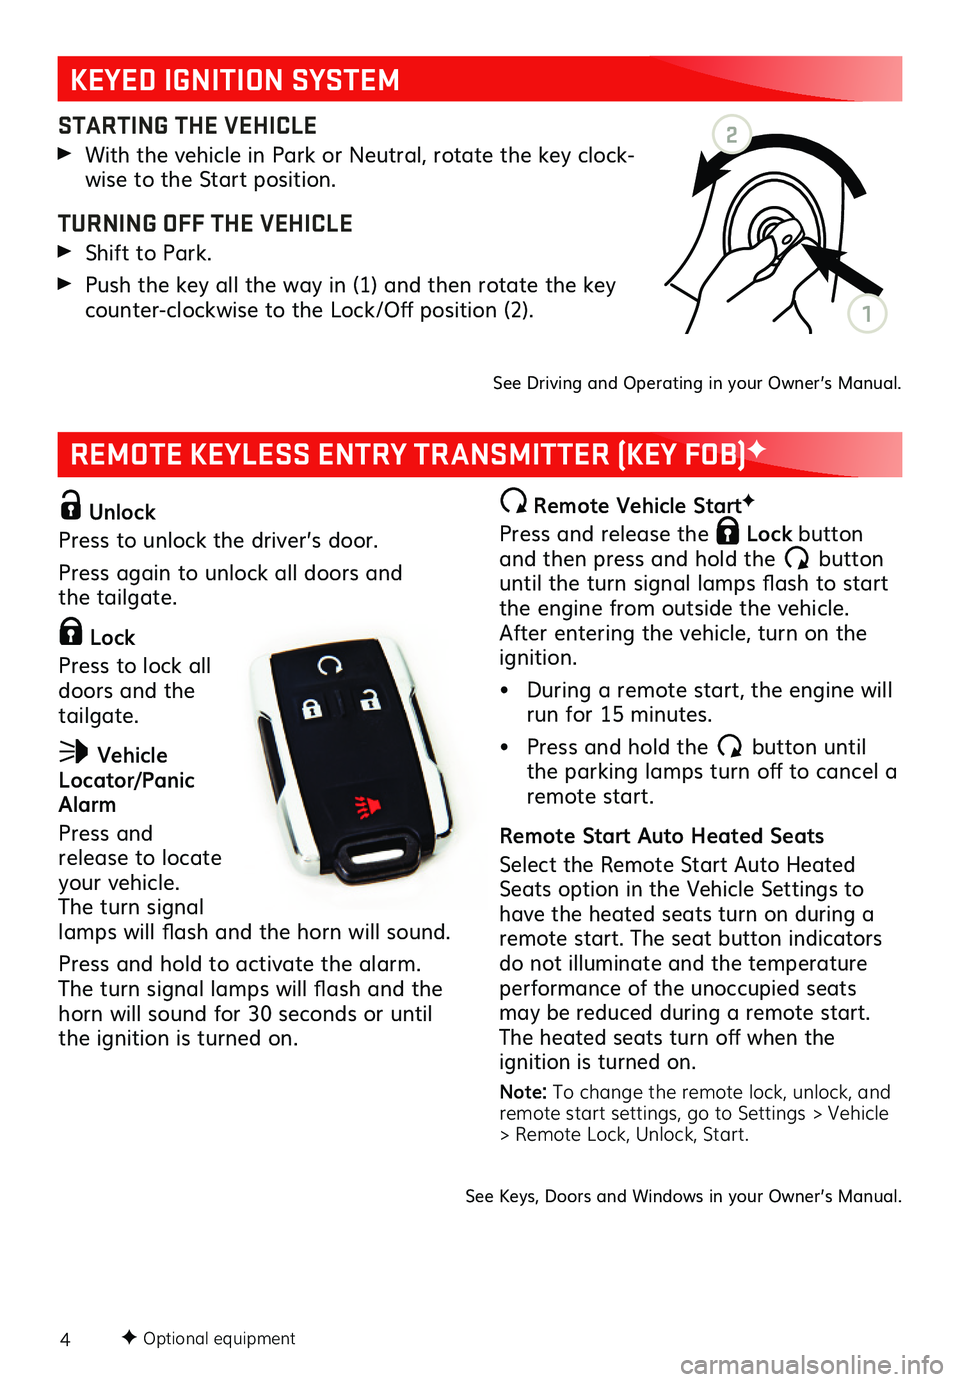 GMC CANYON 2021  Get To Know Guide 4
REMOTE KEYLESS ENTRY TRANSMITTER (KEY FOB)F
F Optional equipment
 Unlock
Press to unlock the driver’s door. 
Press again to unlock all doors and  the tailgate.
 Lock 
Press to lock all doors and t